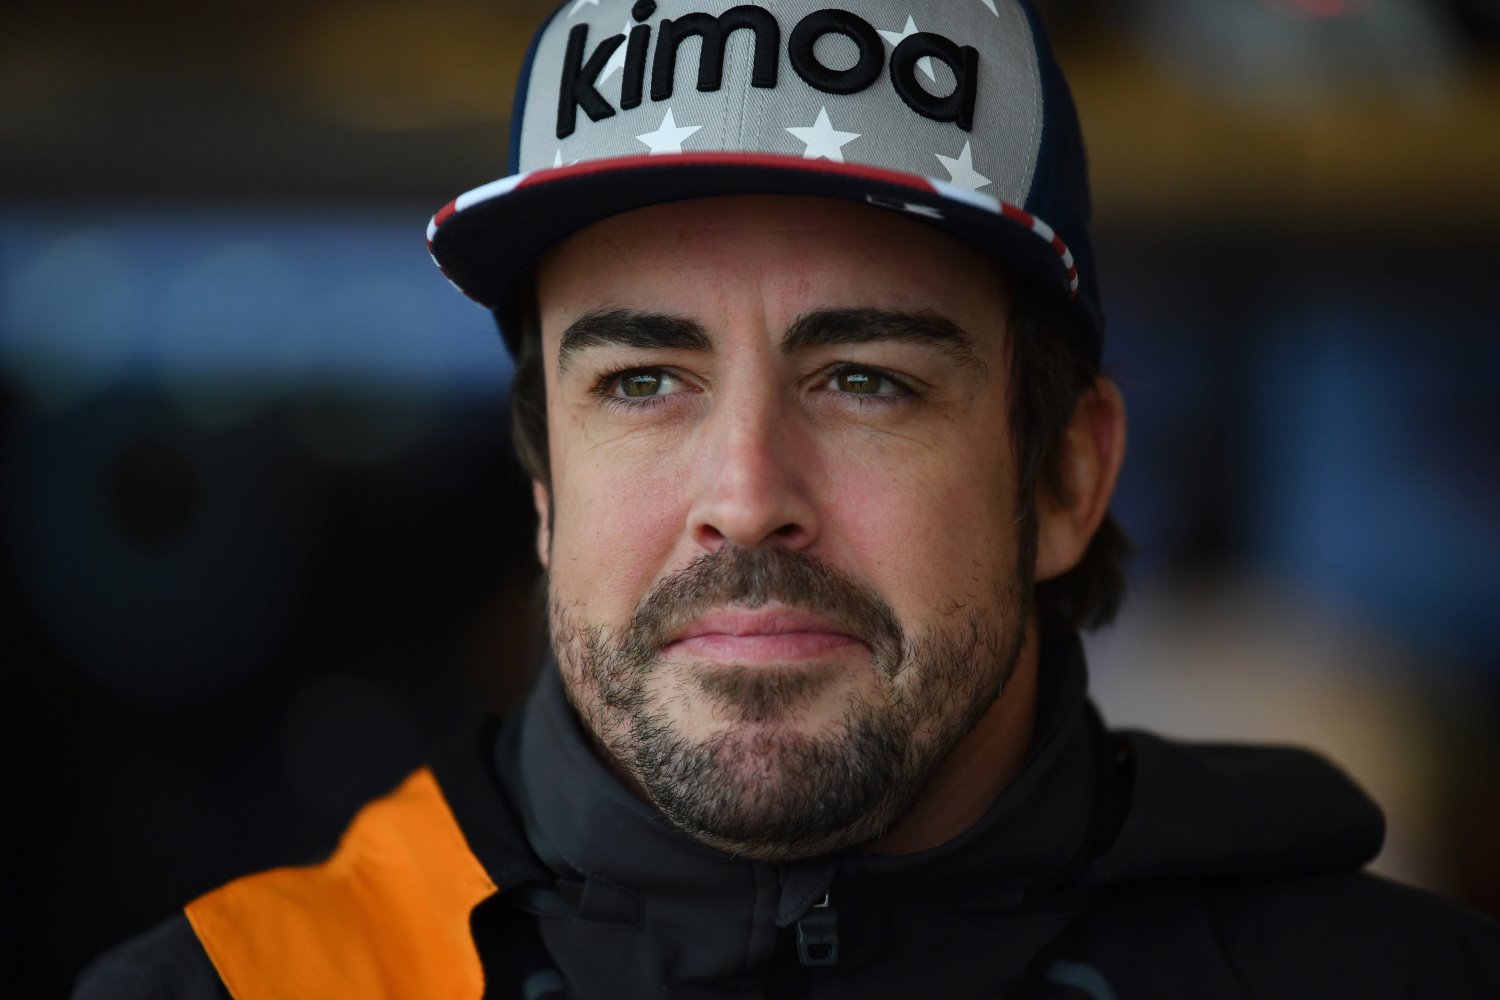 Alonso finds himself shutout of F1 and IndyCar